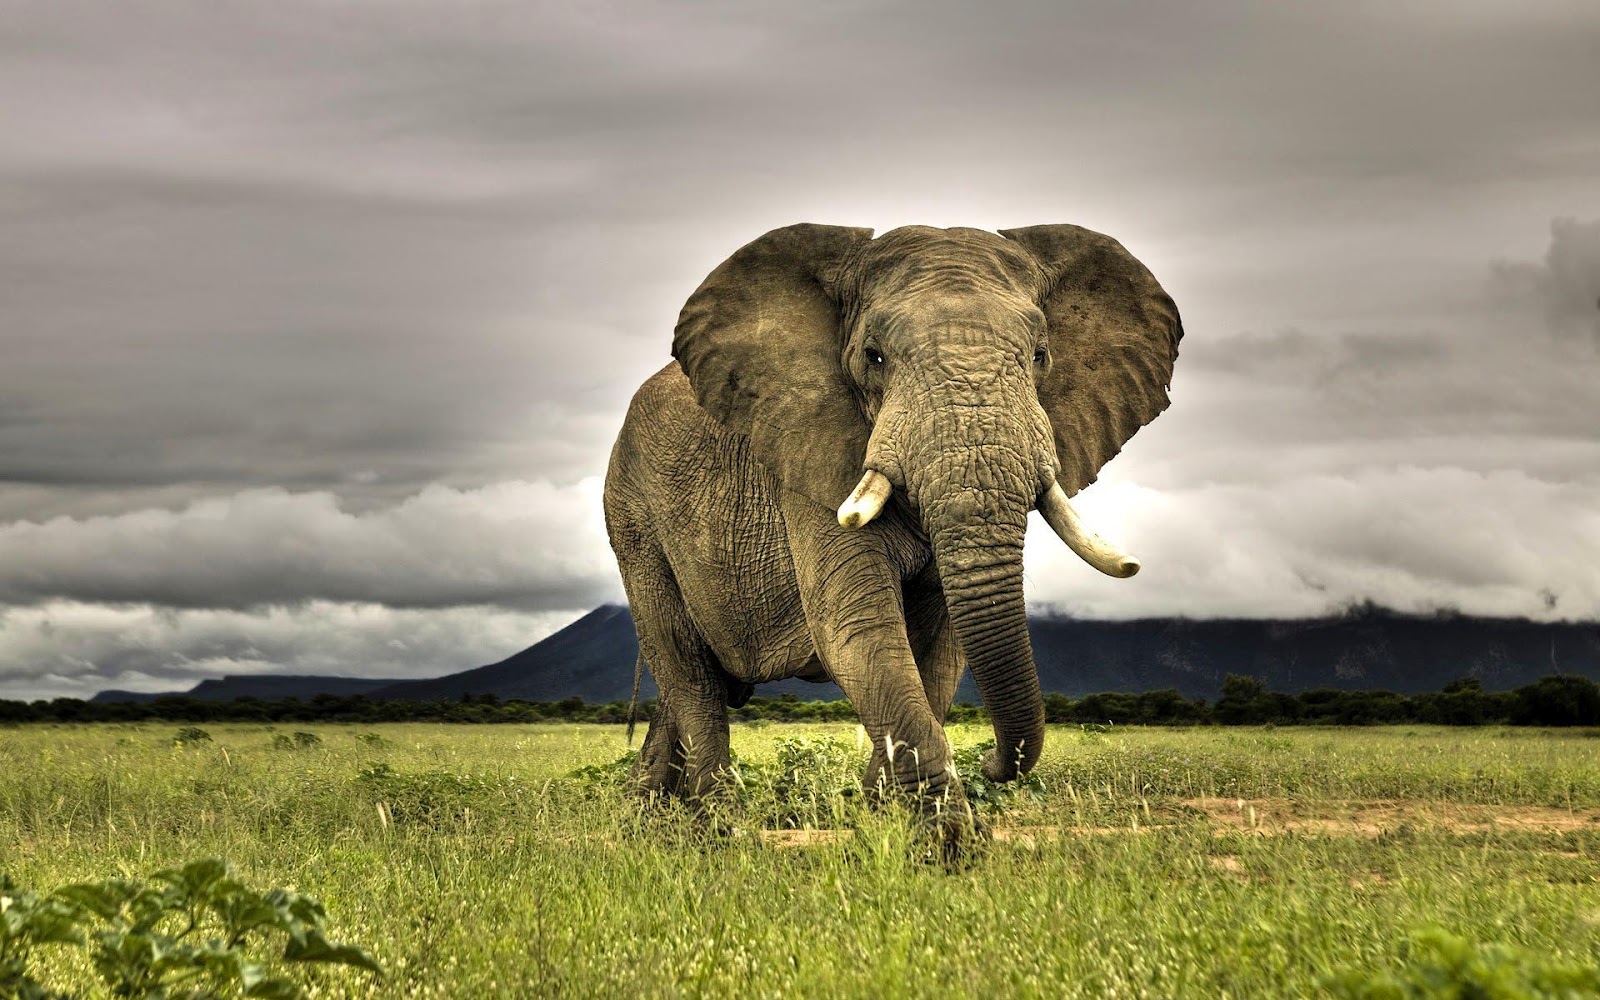 big-elephant-in-attack-mode-hd-animal-wallpaper